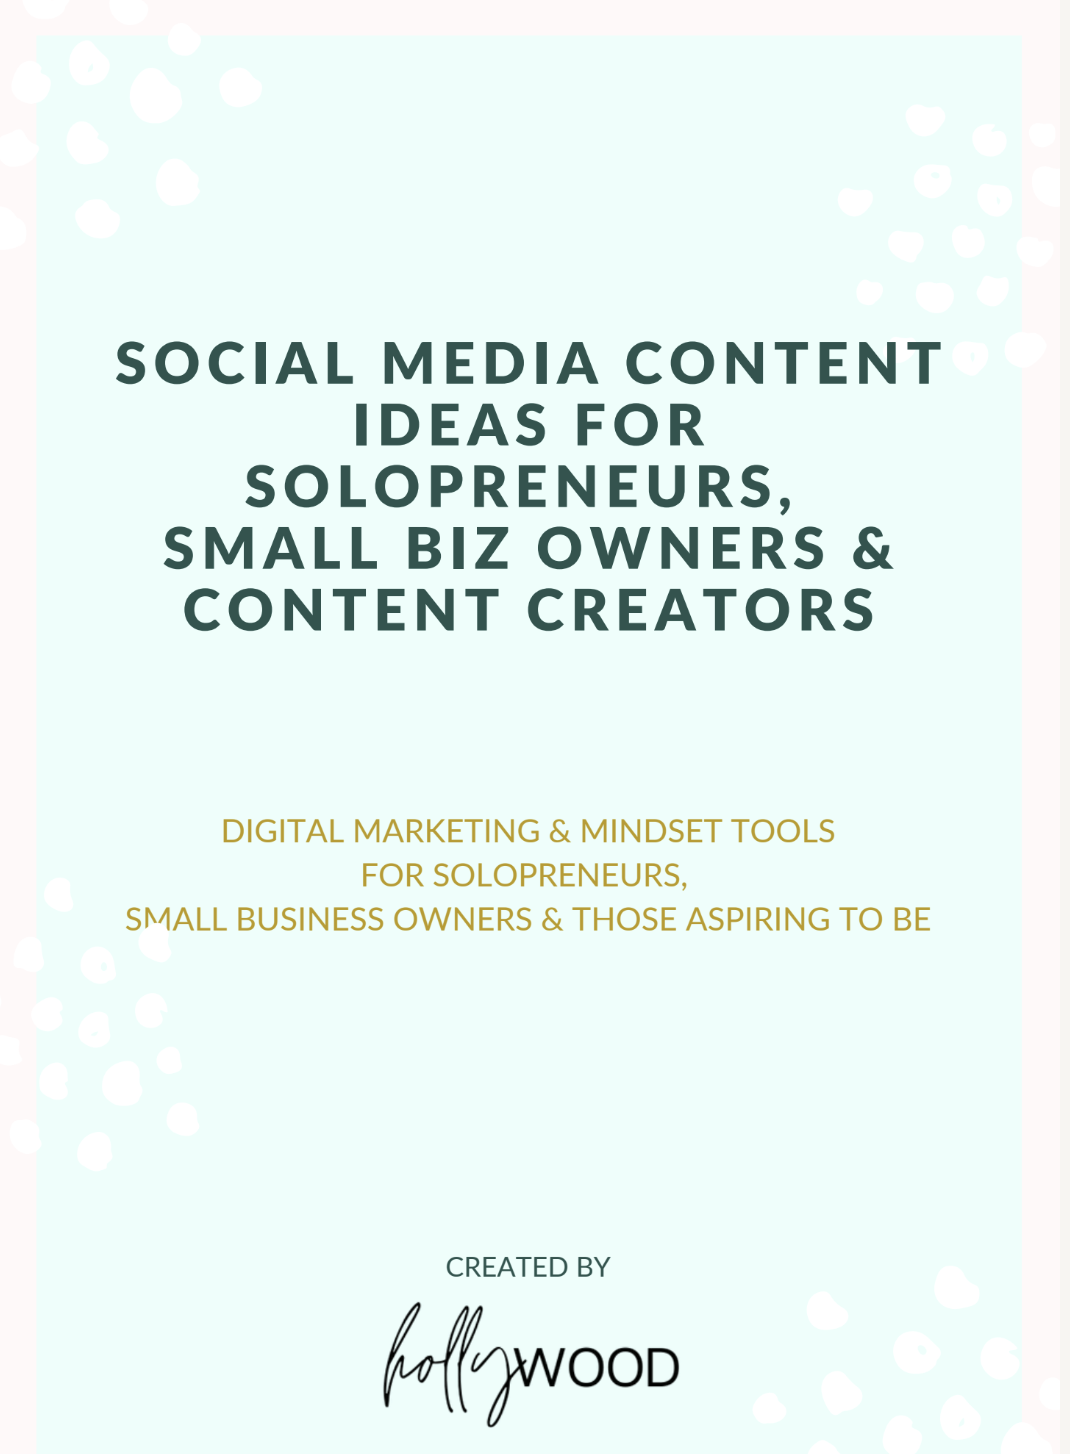 Social Media Content Ideas by Holly Wood